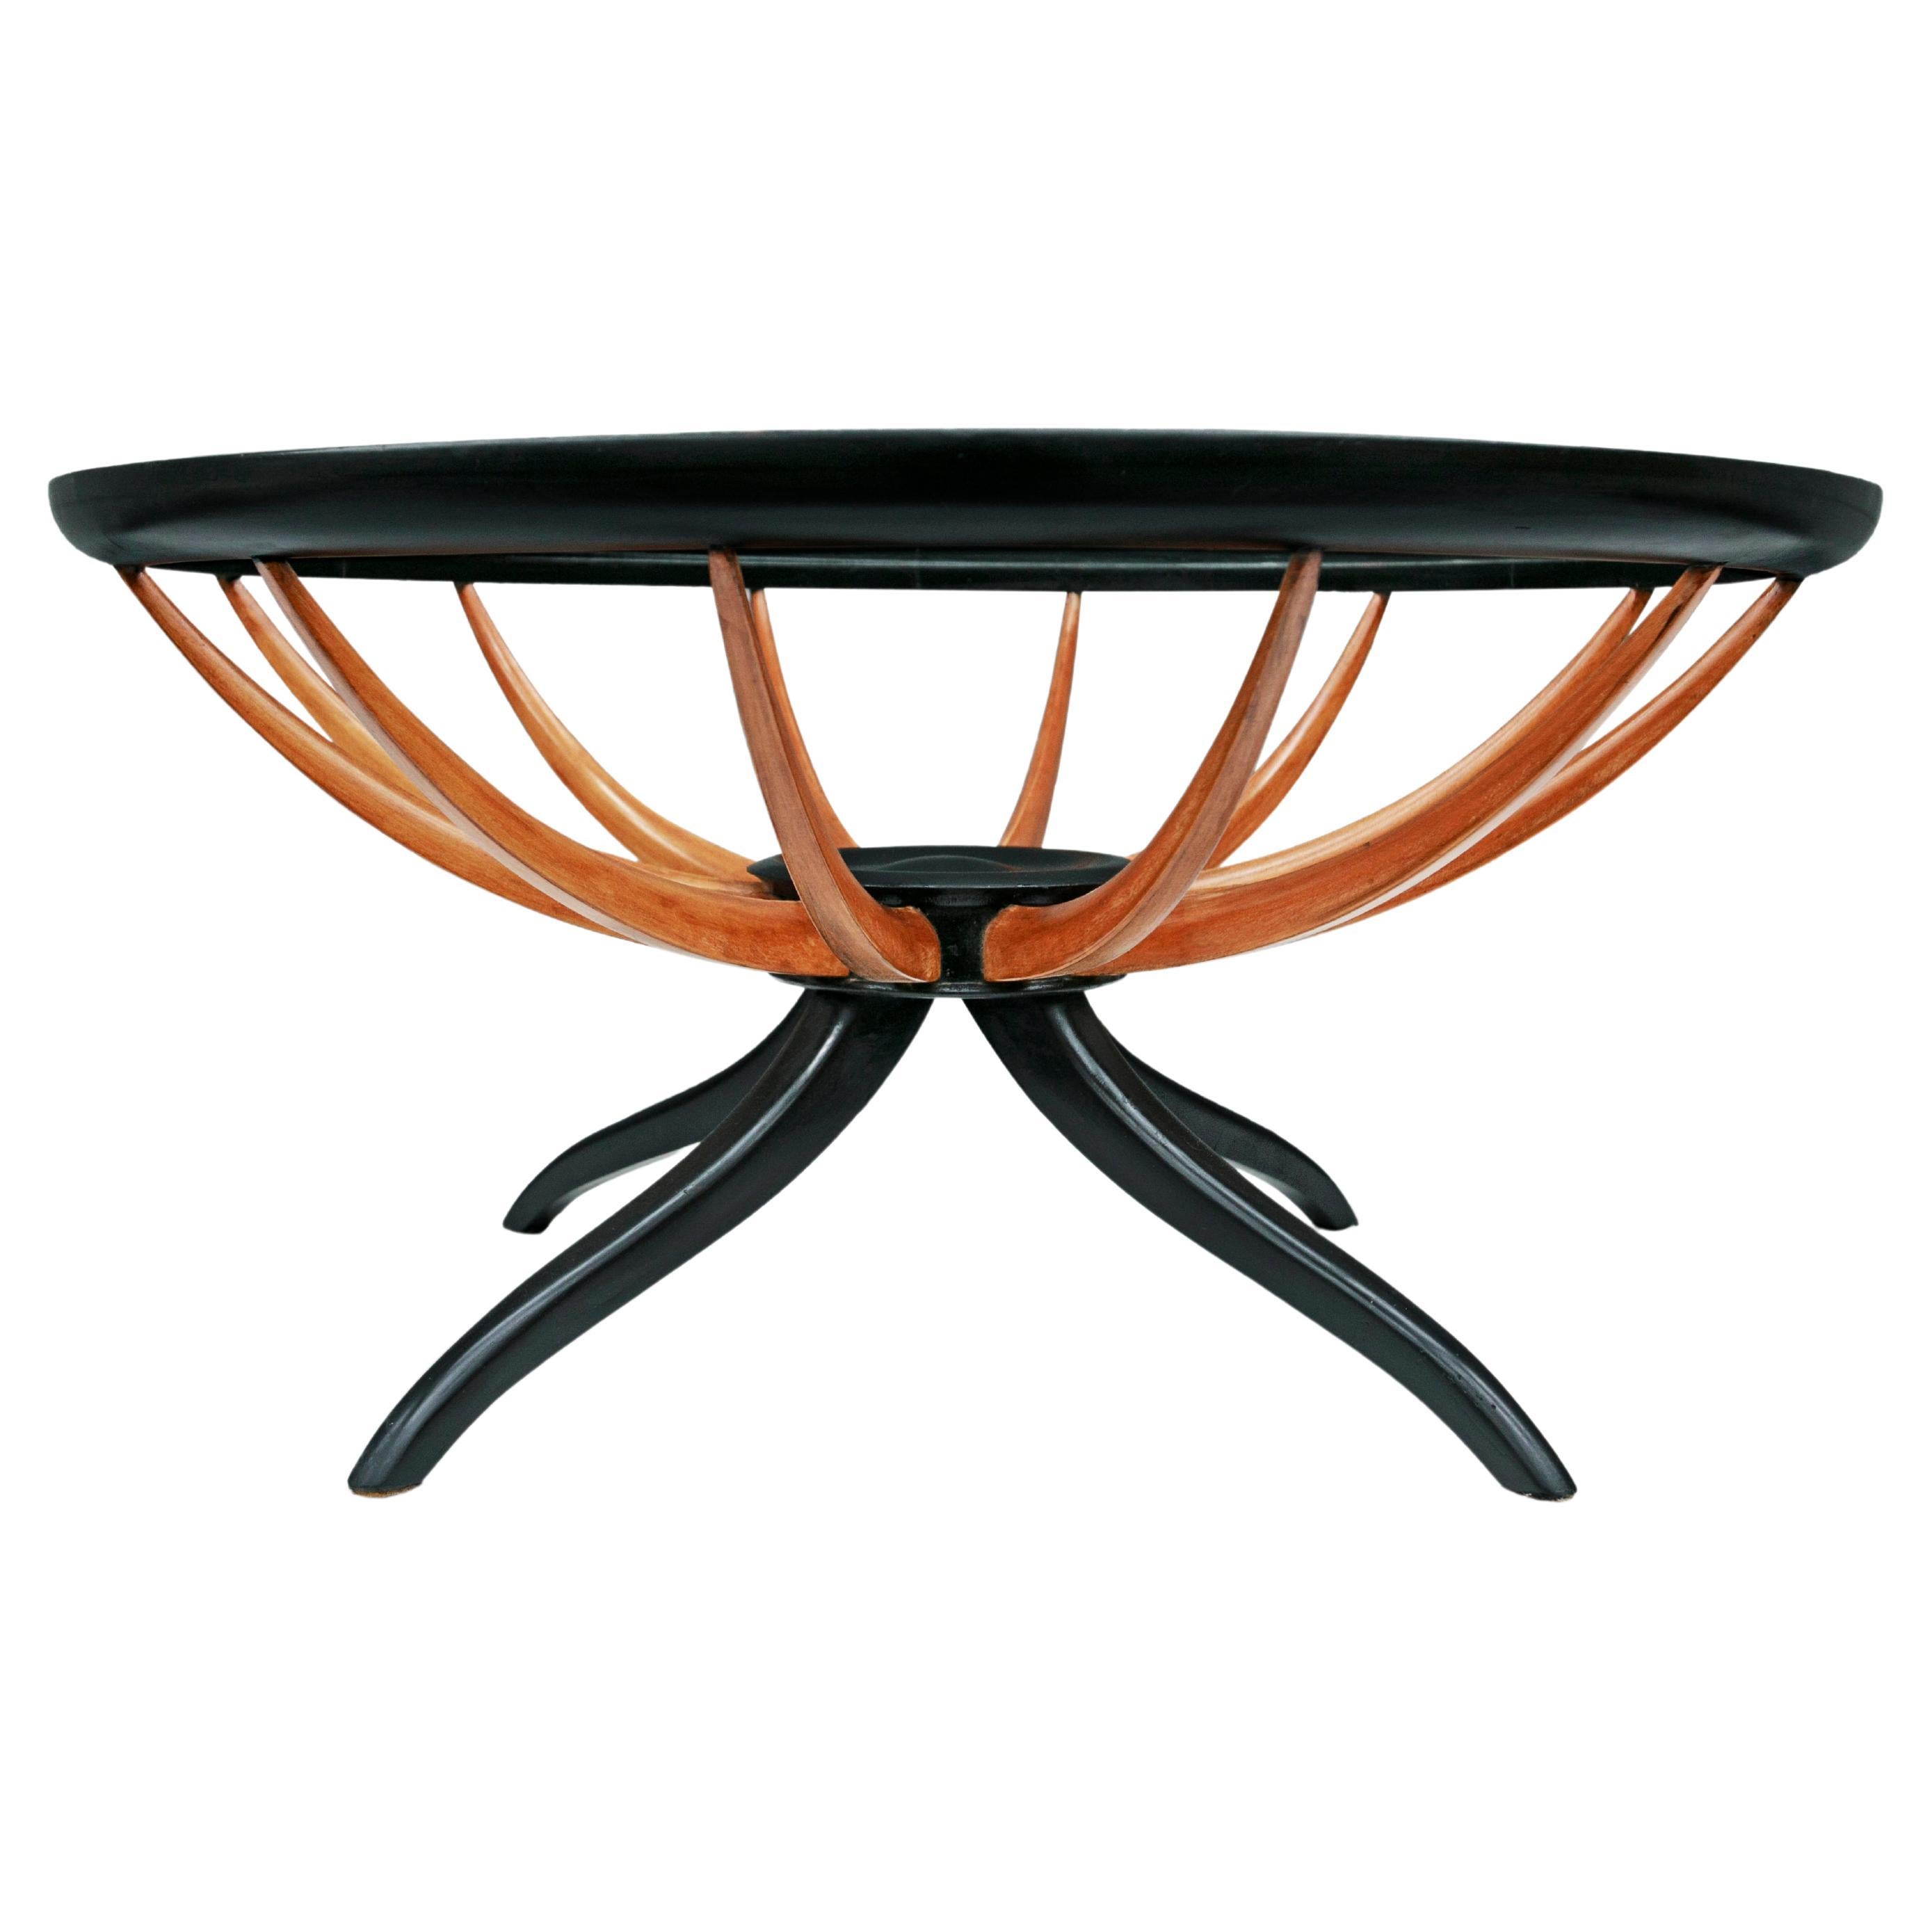 Brazilian Modern Coffee Table in Two Tones of Hardwood by G. Scapinelli, Brazil